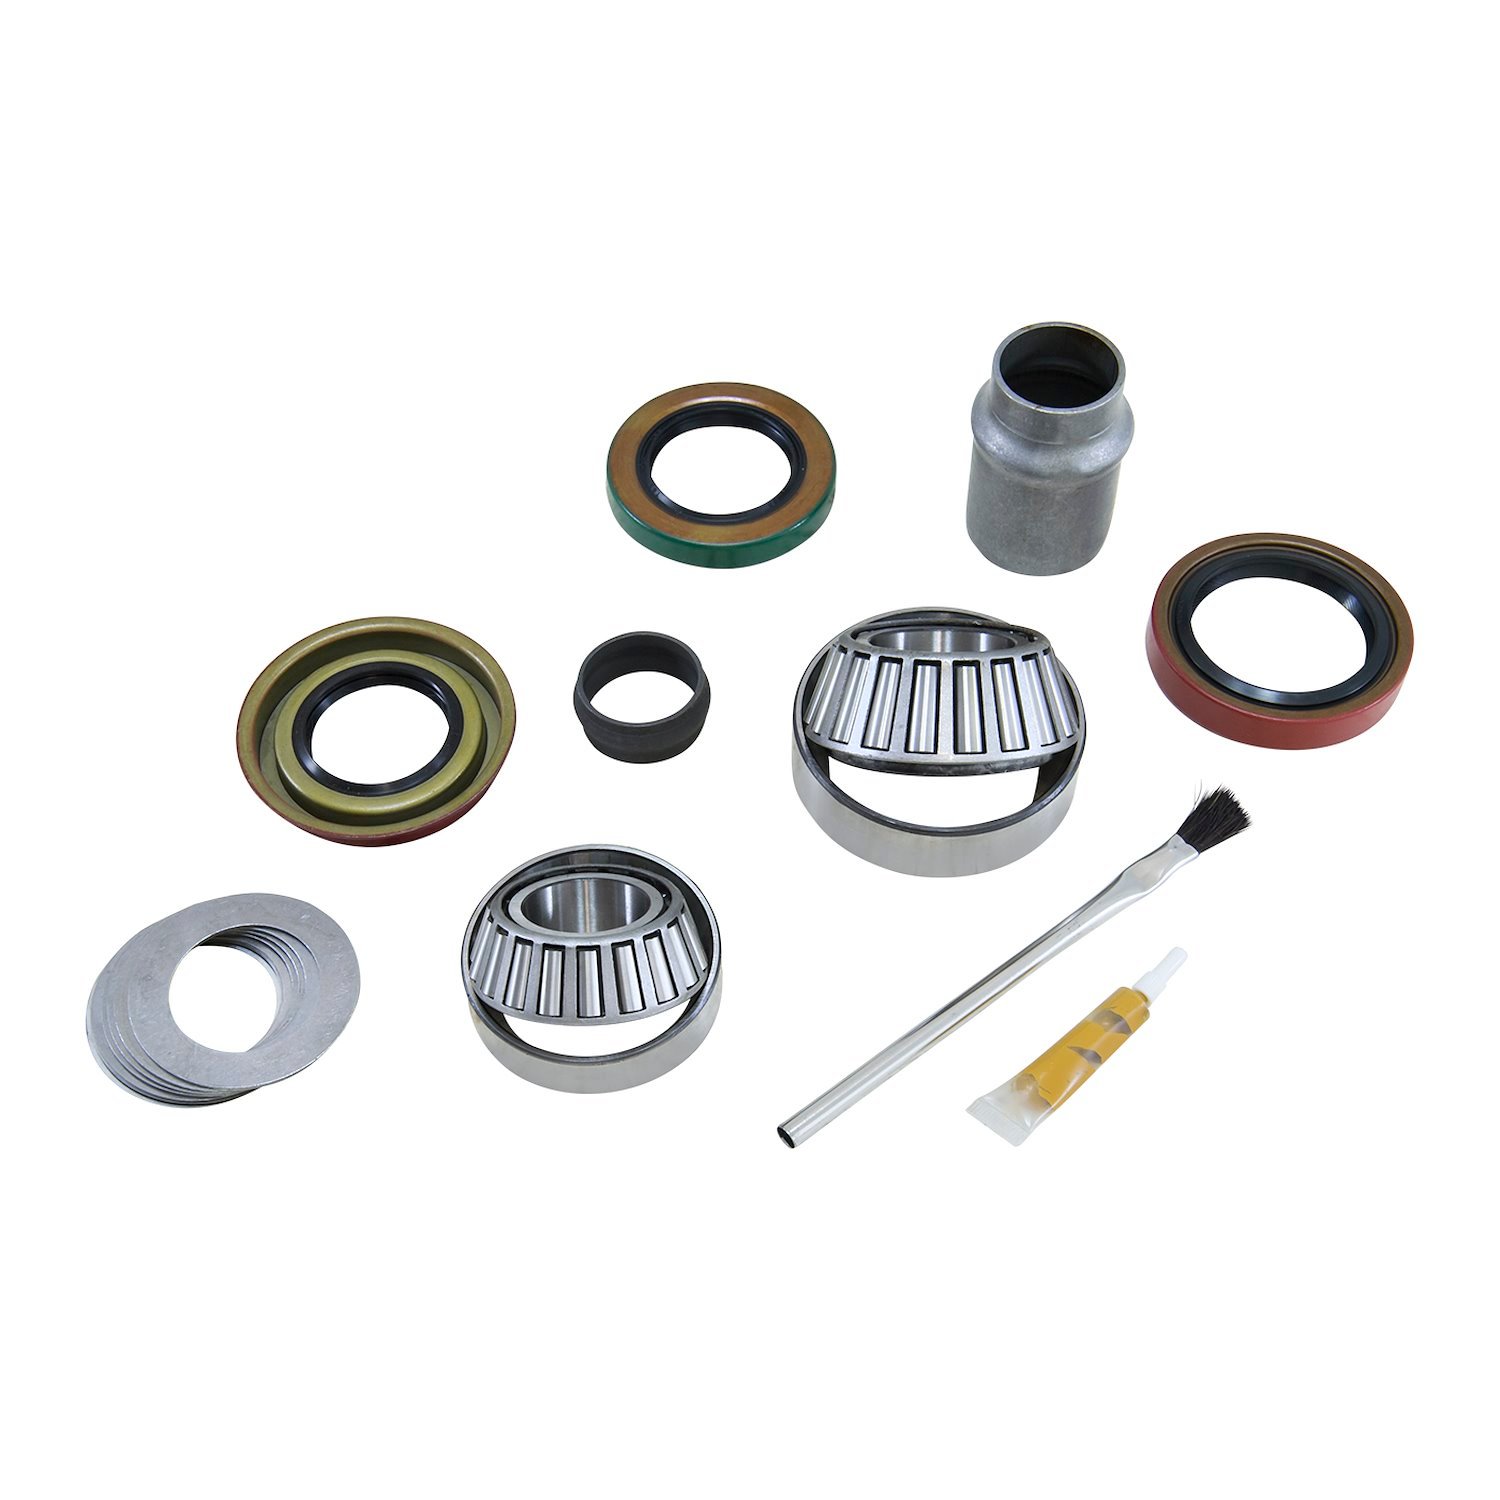 Pinion Install Kit For GM 8.2 in. Diff For Buick, Pontiac, And Oldsmobile